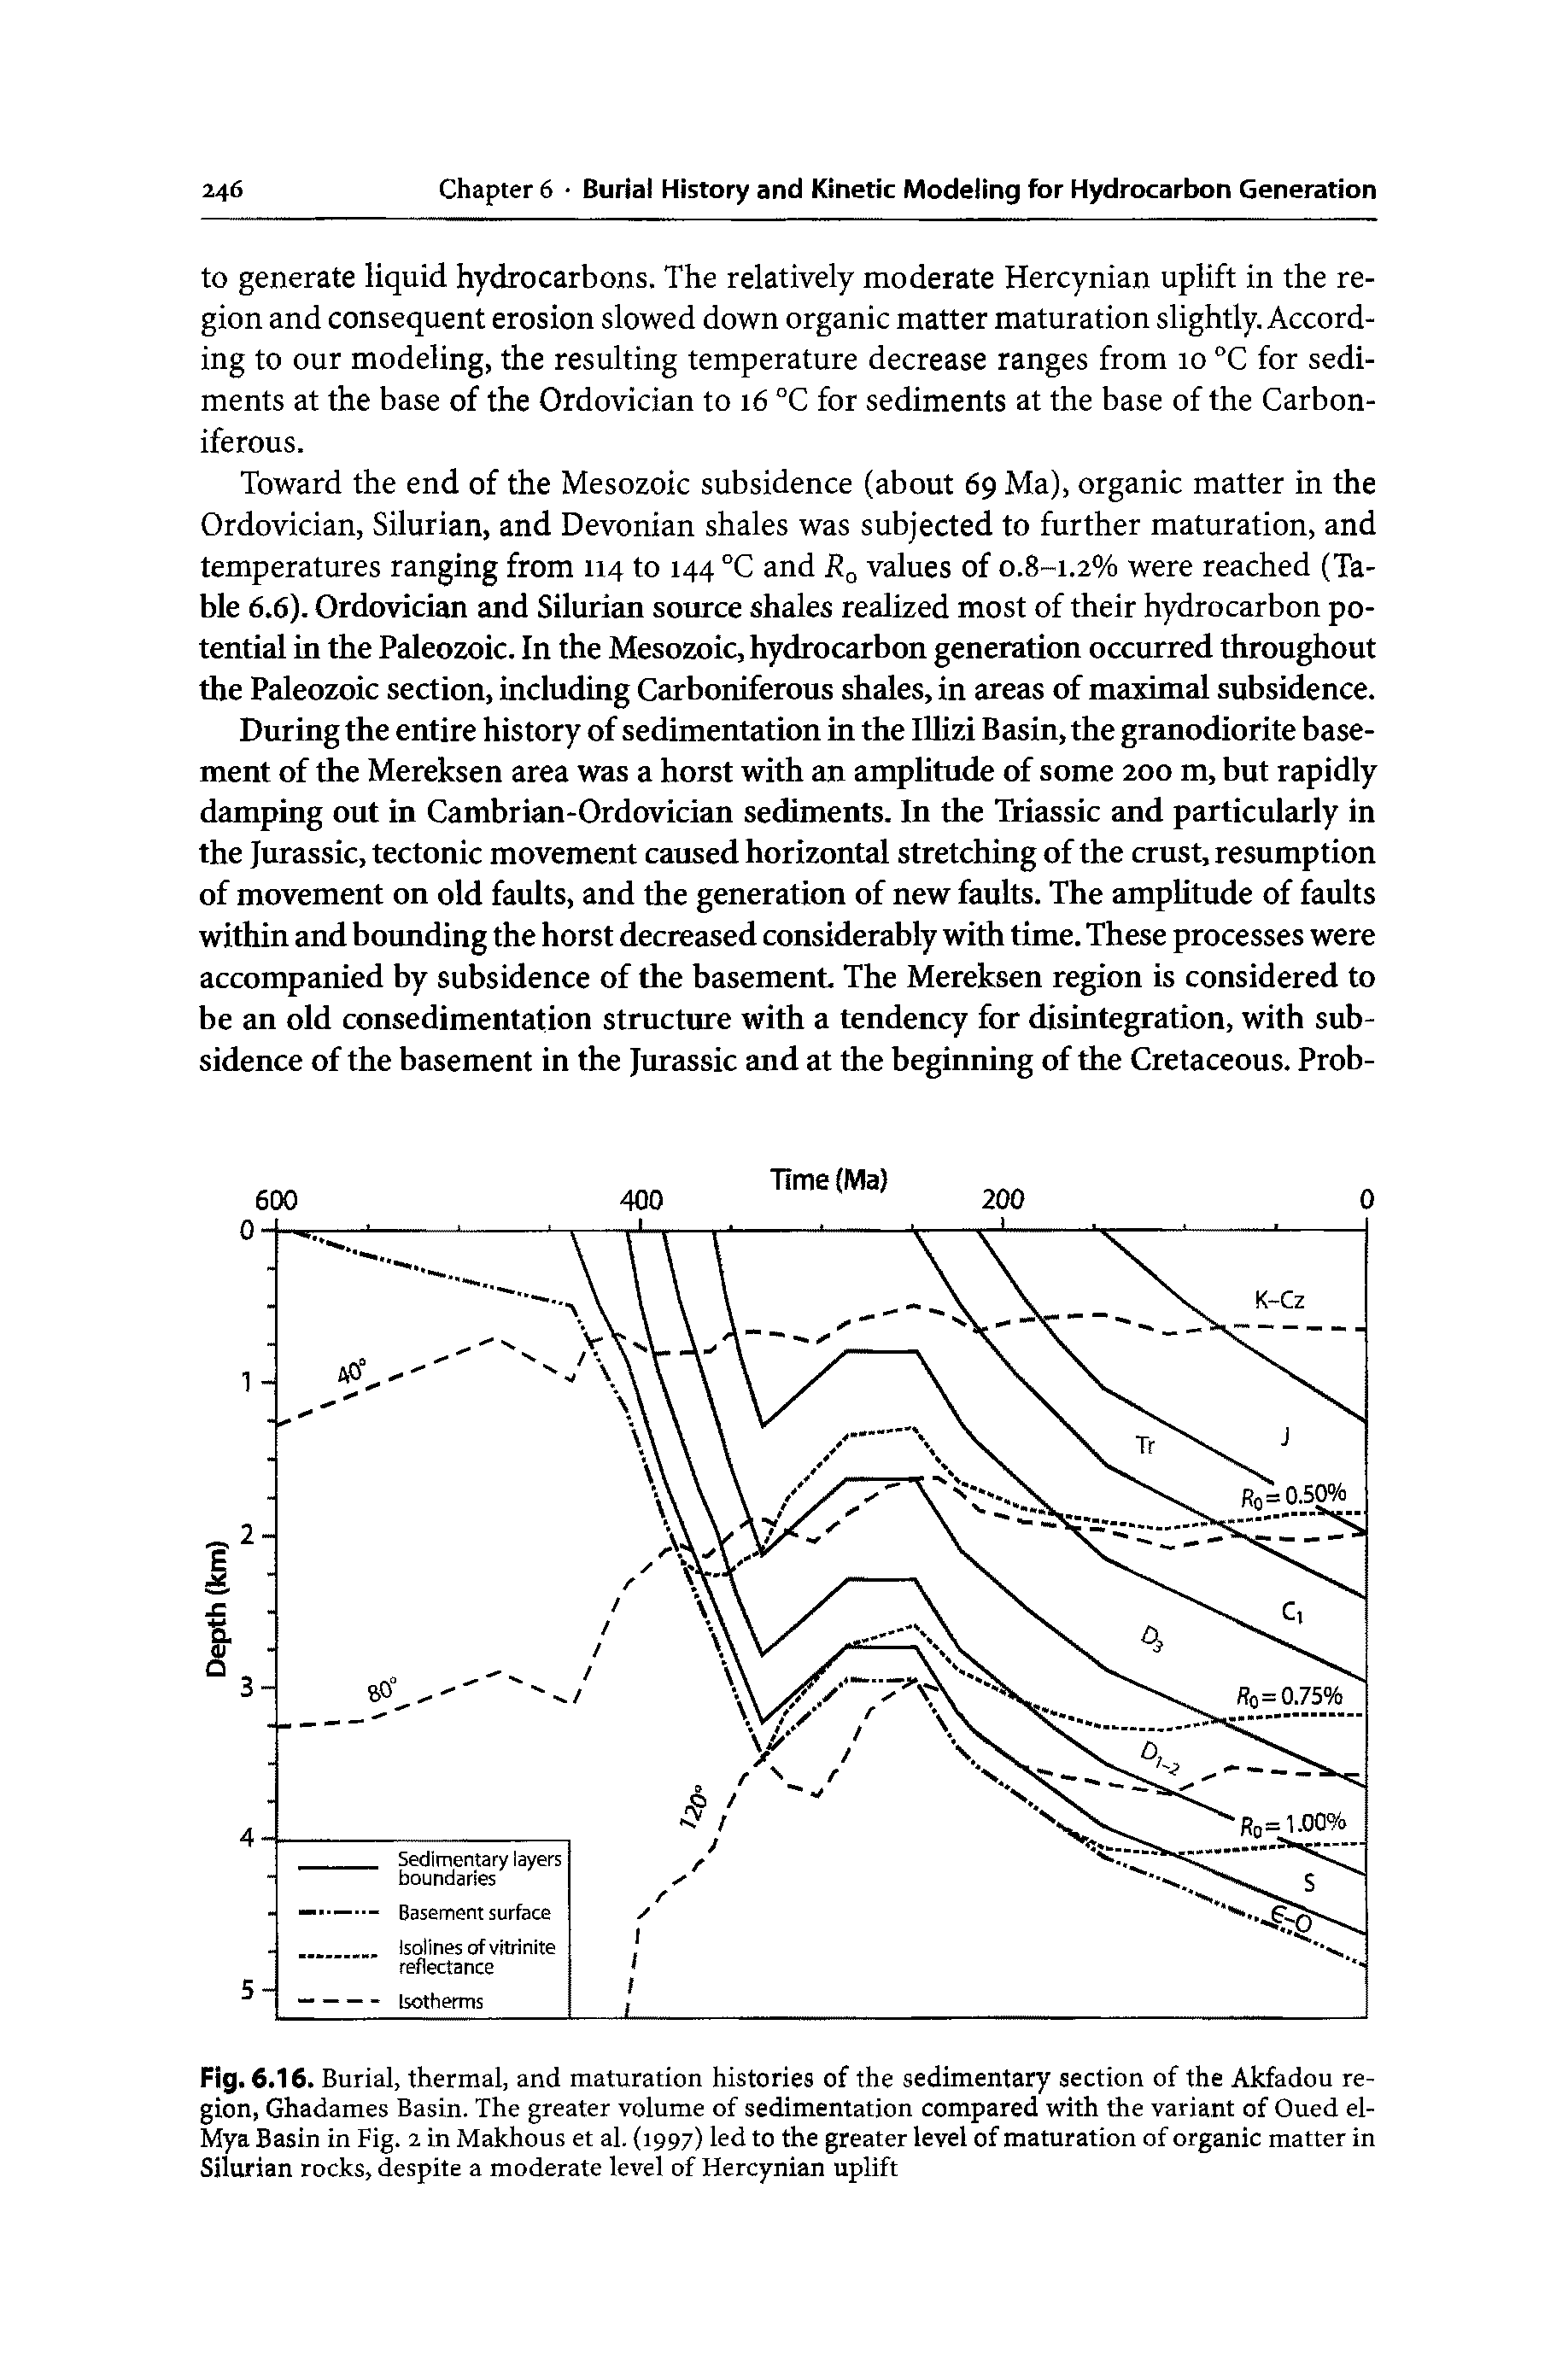 Fig. 6.16. Burial, thermal, and maturation histories of the sedimentary section of the Akfadou region, Ghadames Basin. The greater volume of sedimentation compared with the variant of Oued el-Mya Basin in Fig. 2 in Makhous et al. (1997) led to the greater level of maturation of organic matter in Silurian rocks, despite a moderate level of Hercynian uplift...